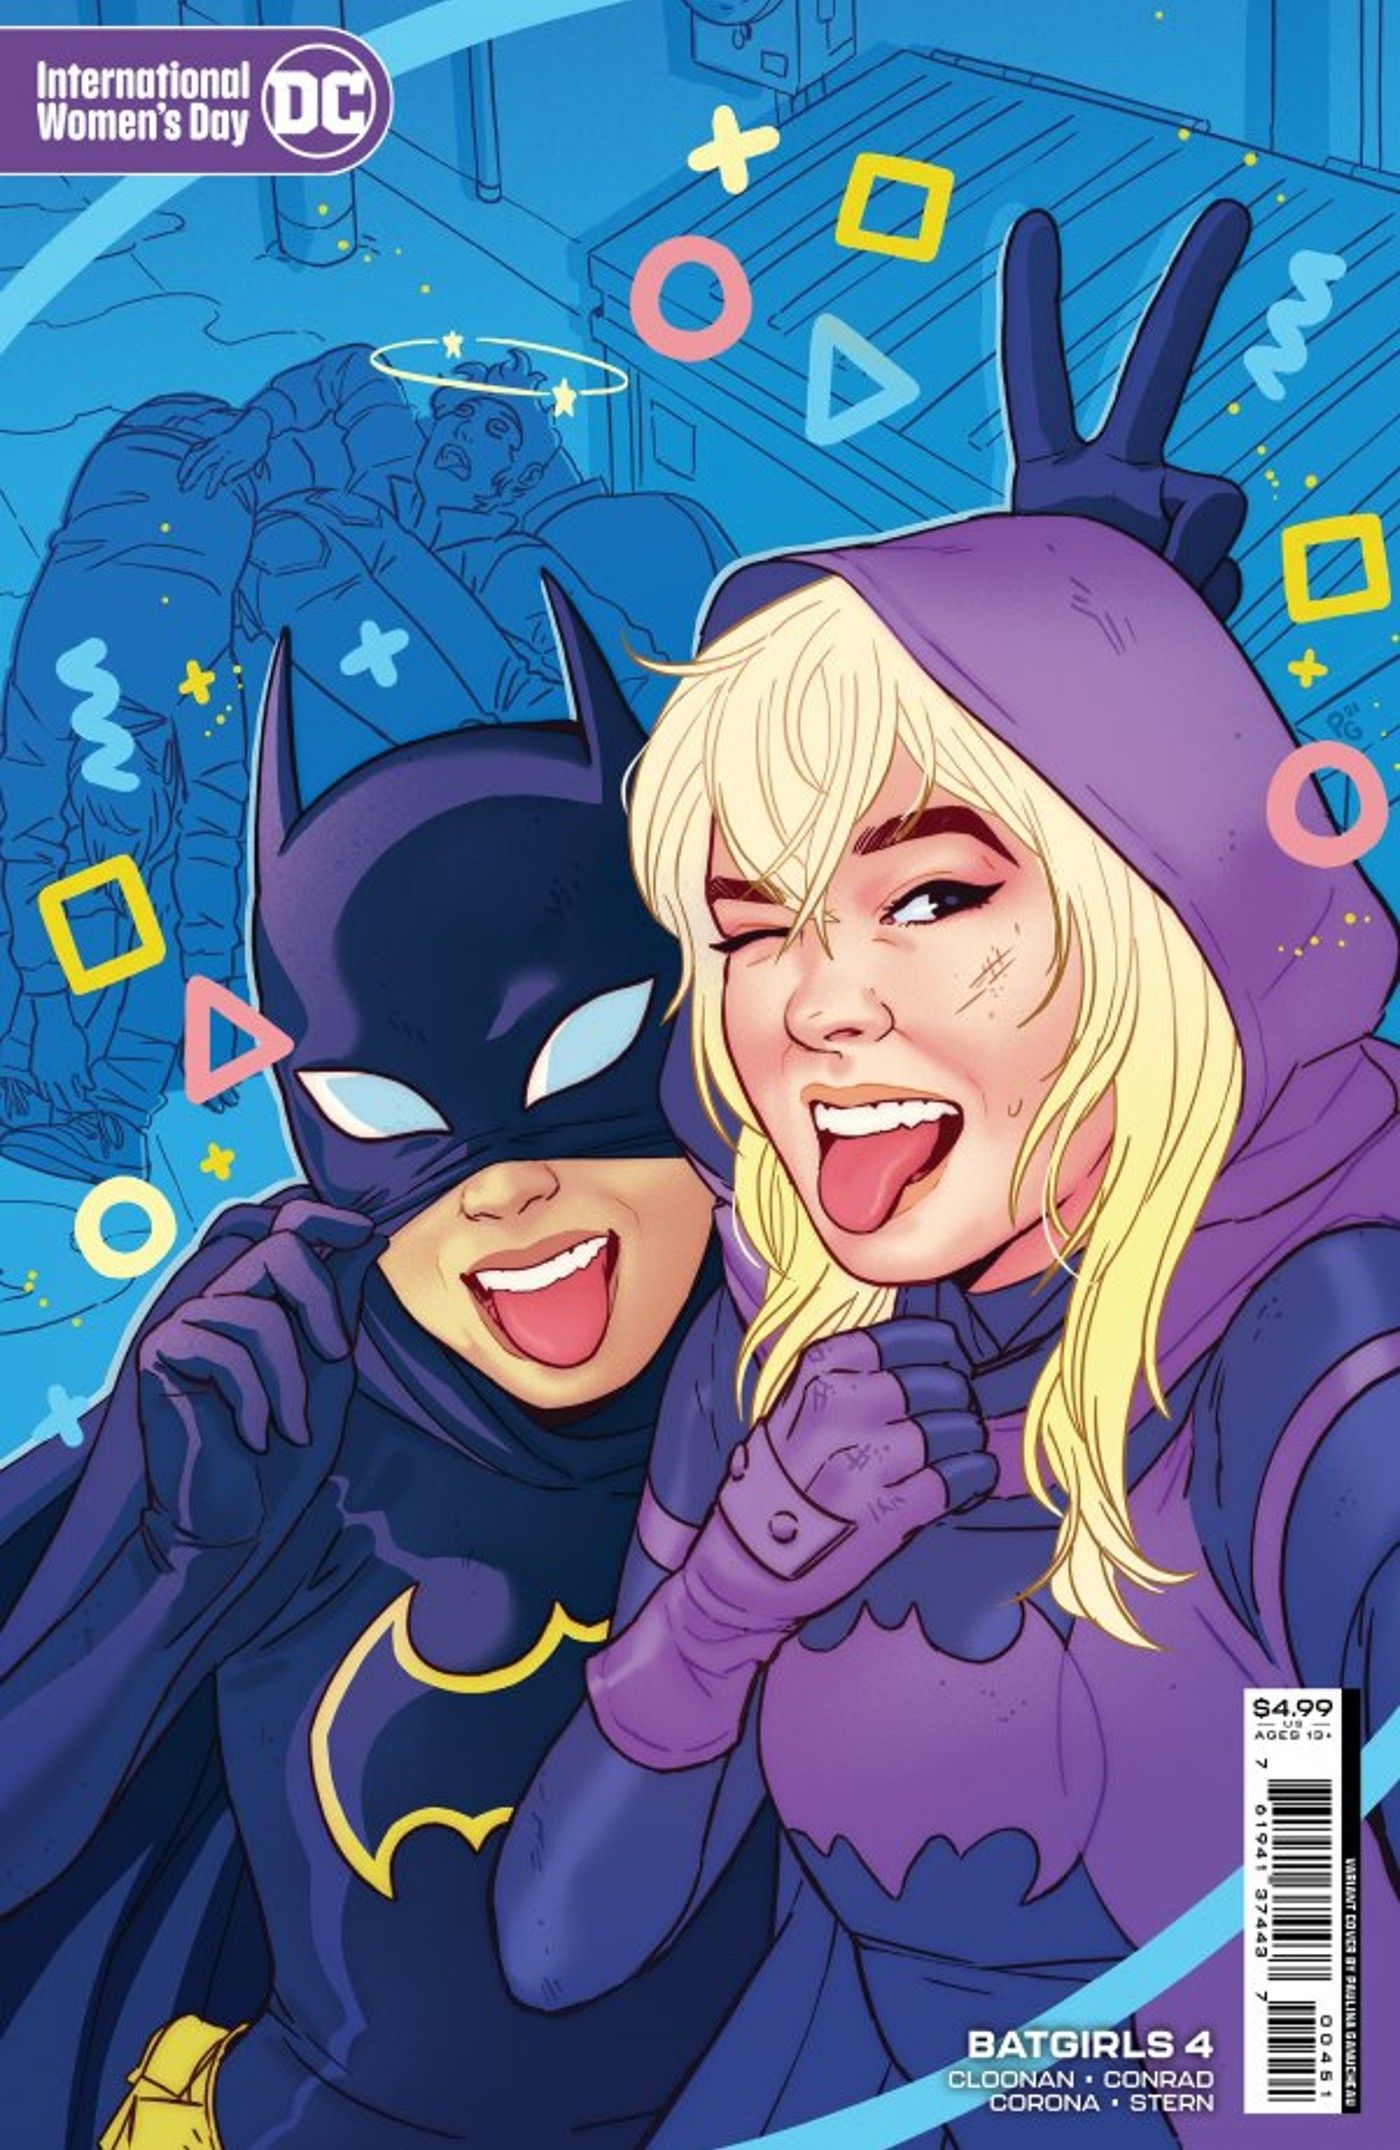 New DC Variant Covers Unveiled for International Women’s Day